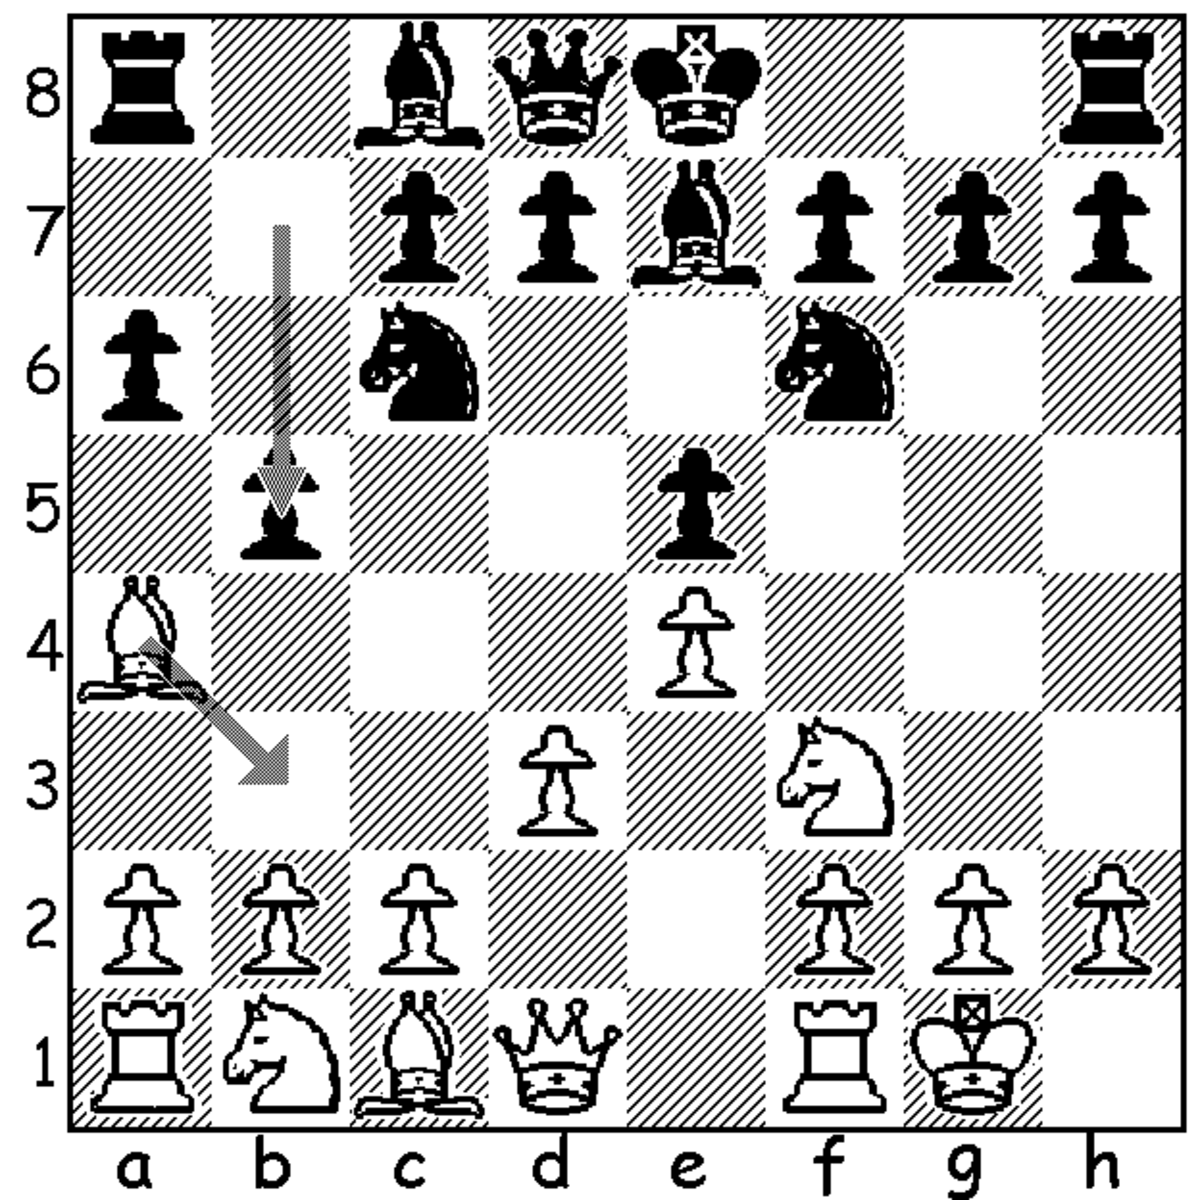 What are the differences between 12.d3 and 12.d4 in the Ruy Lopez